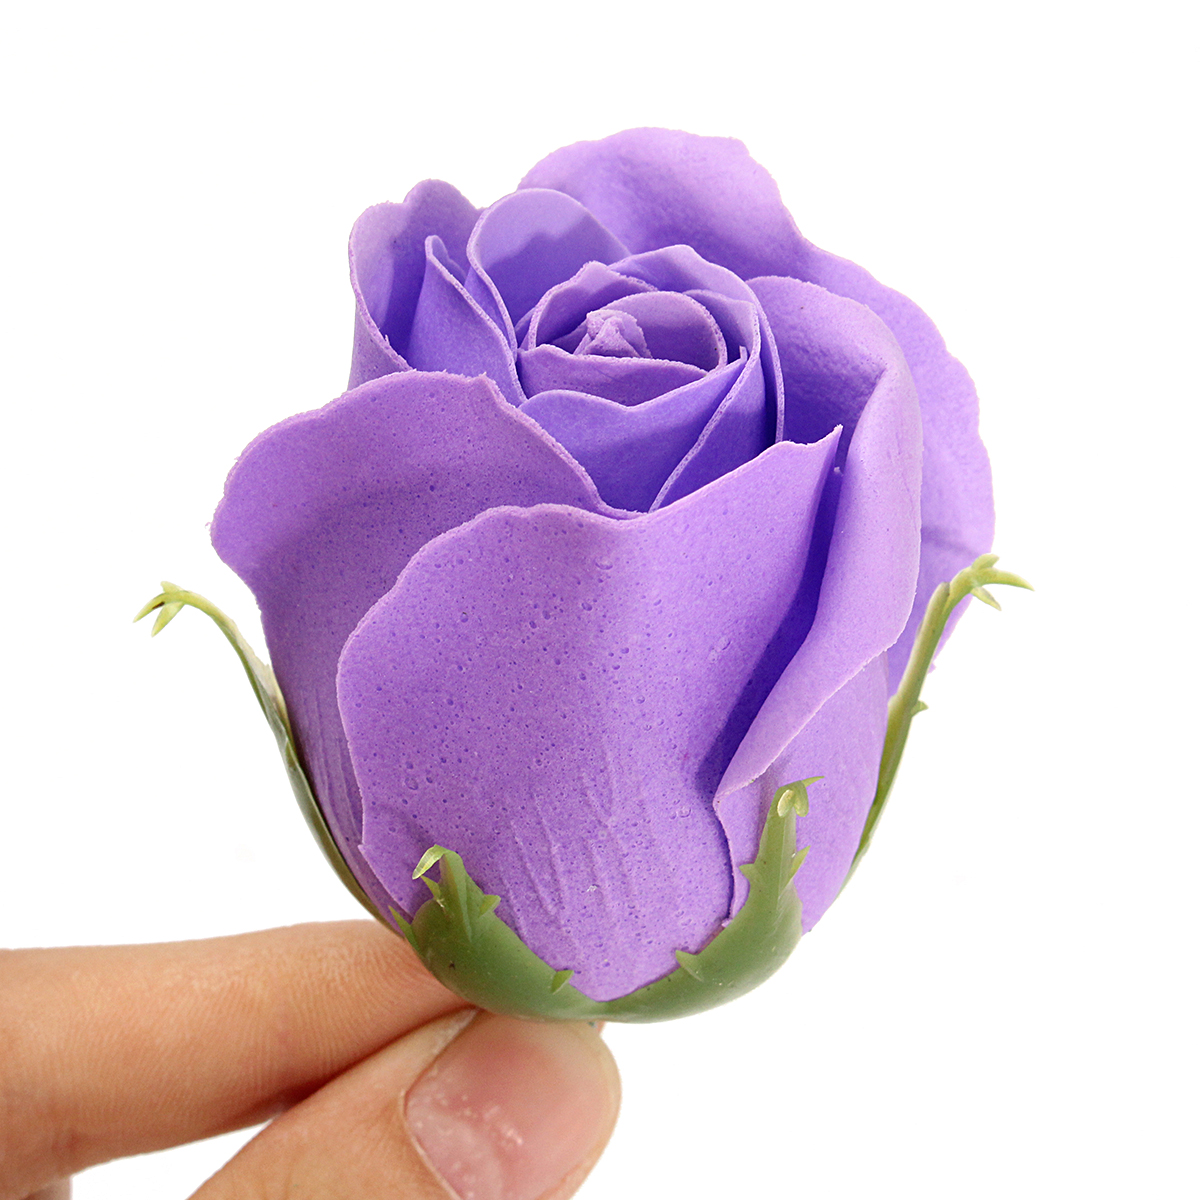 Simulation-Artificial-Rose-Soap-Flower-For-Wedding-Party-Home-Decoration-Valentines-Day-Gift-1069981-11